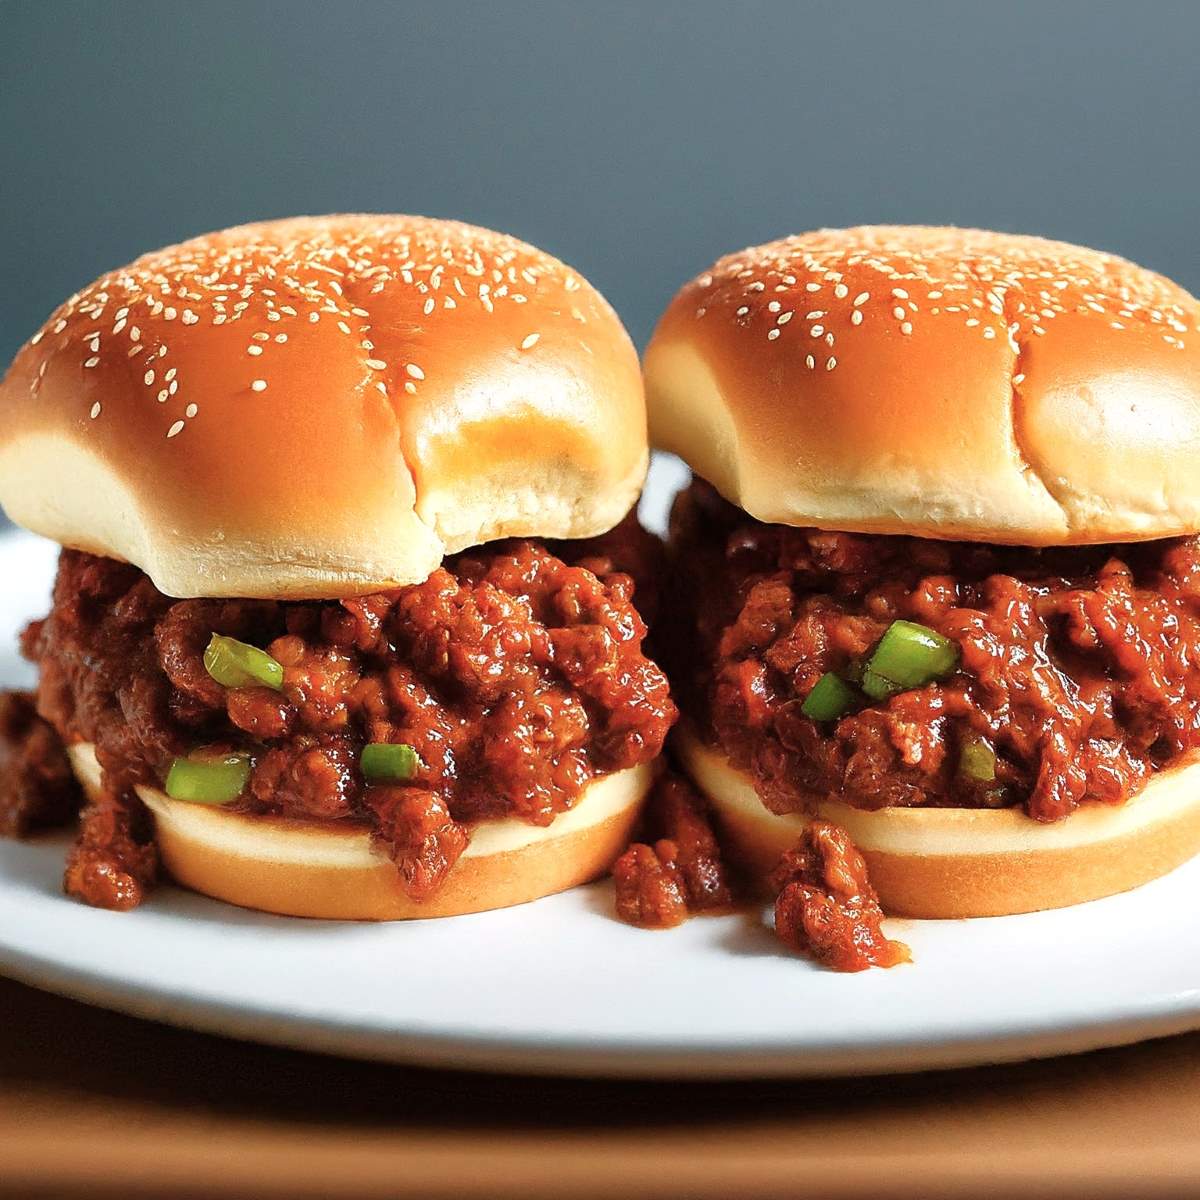 Sloppy Joe Sandwiches with Green Peppers and Carrots